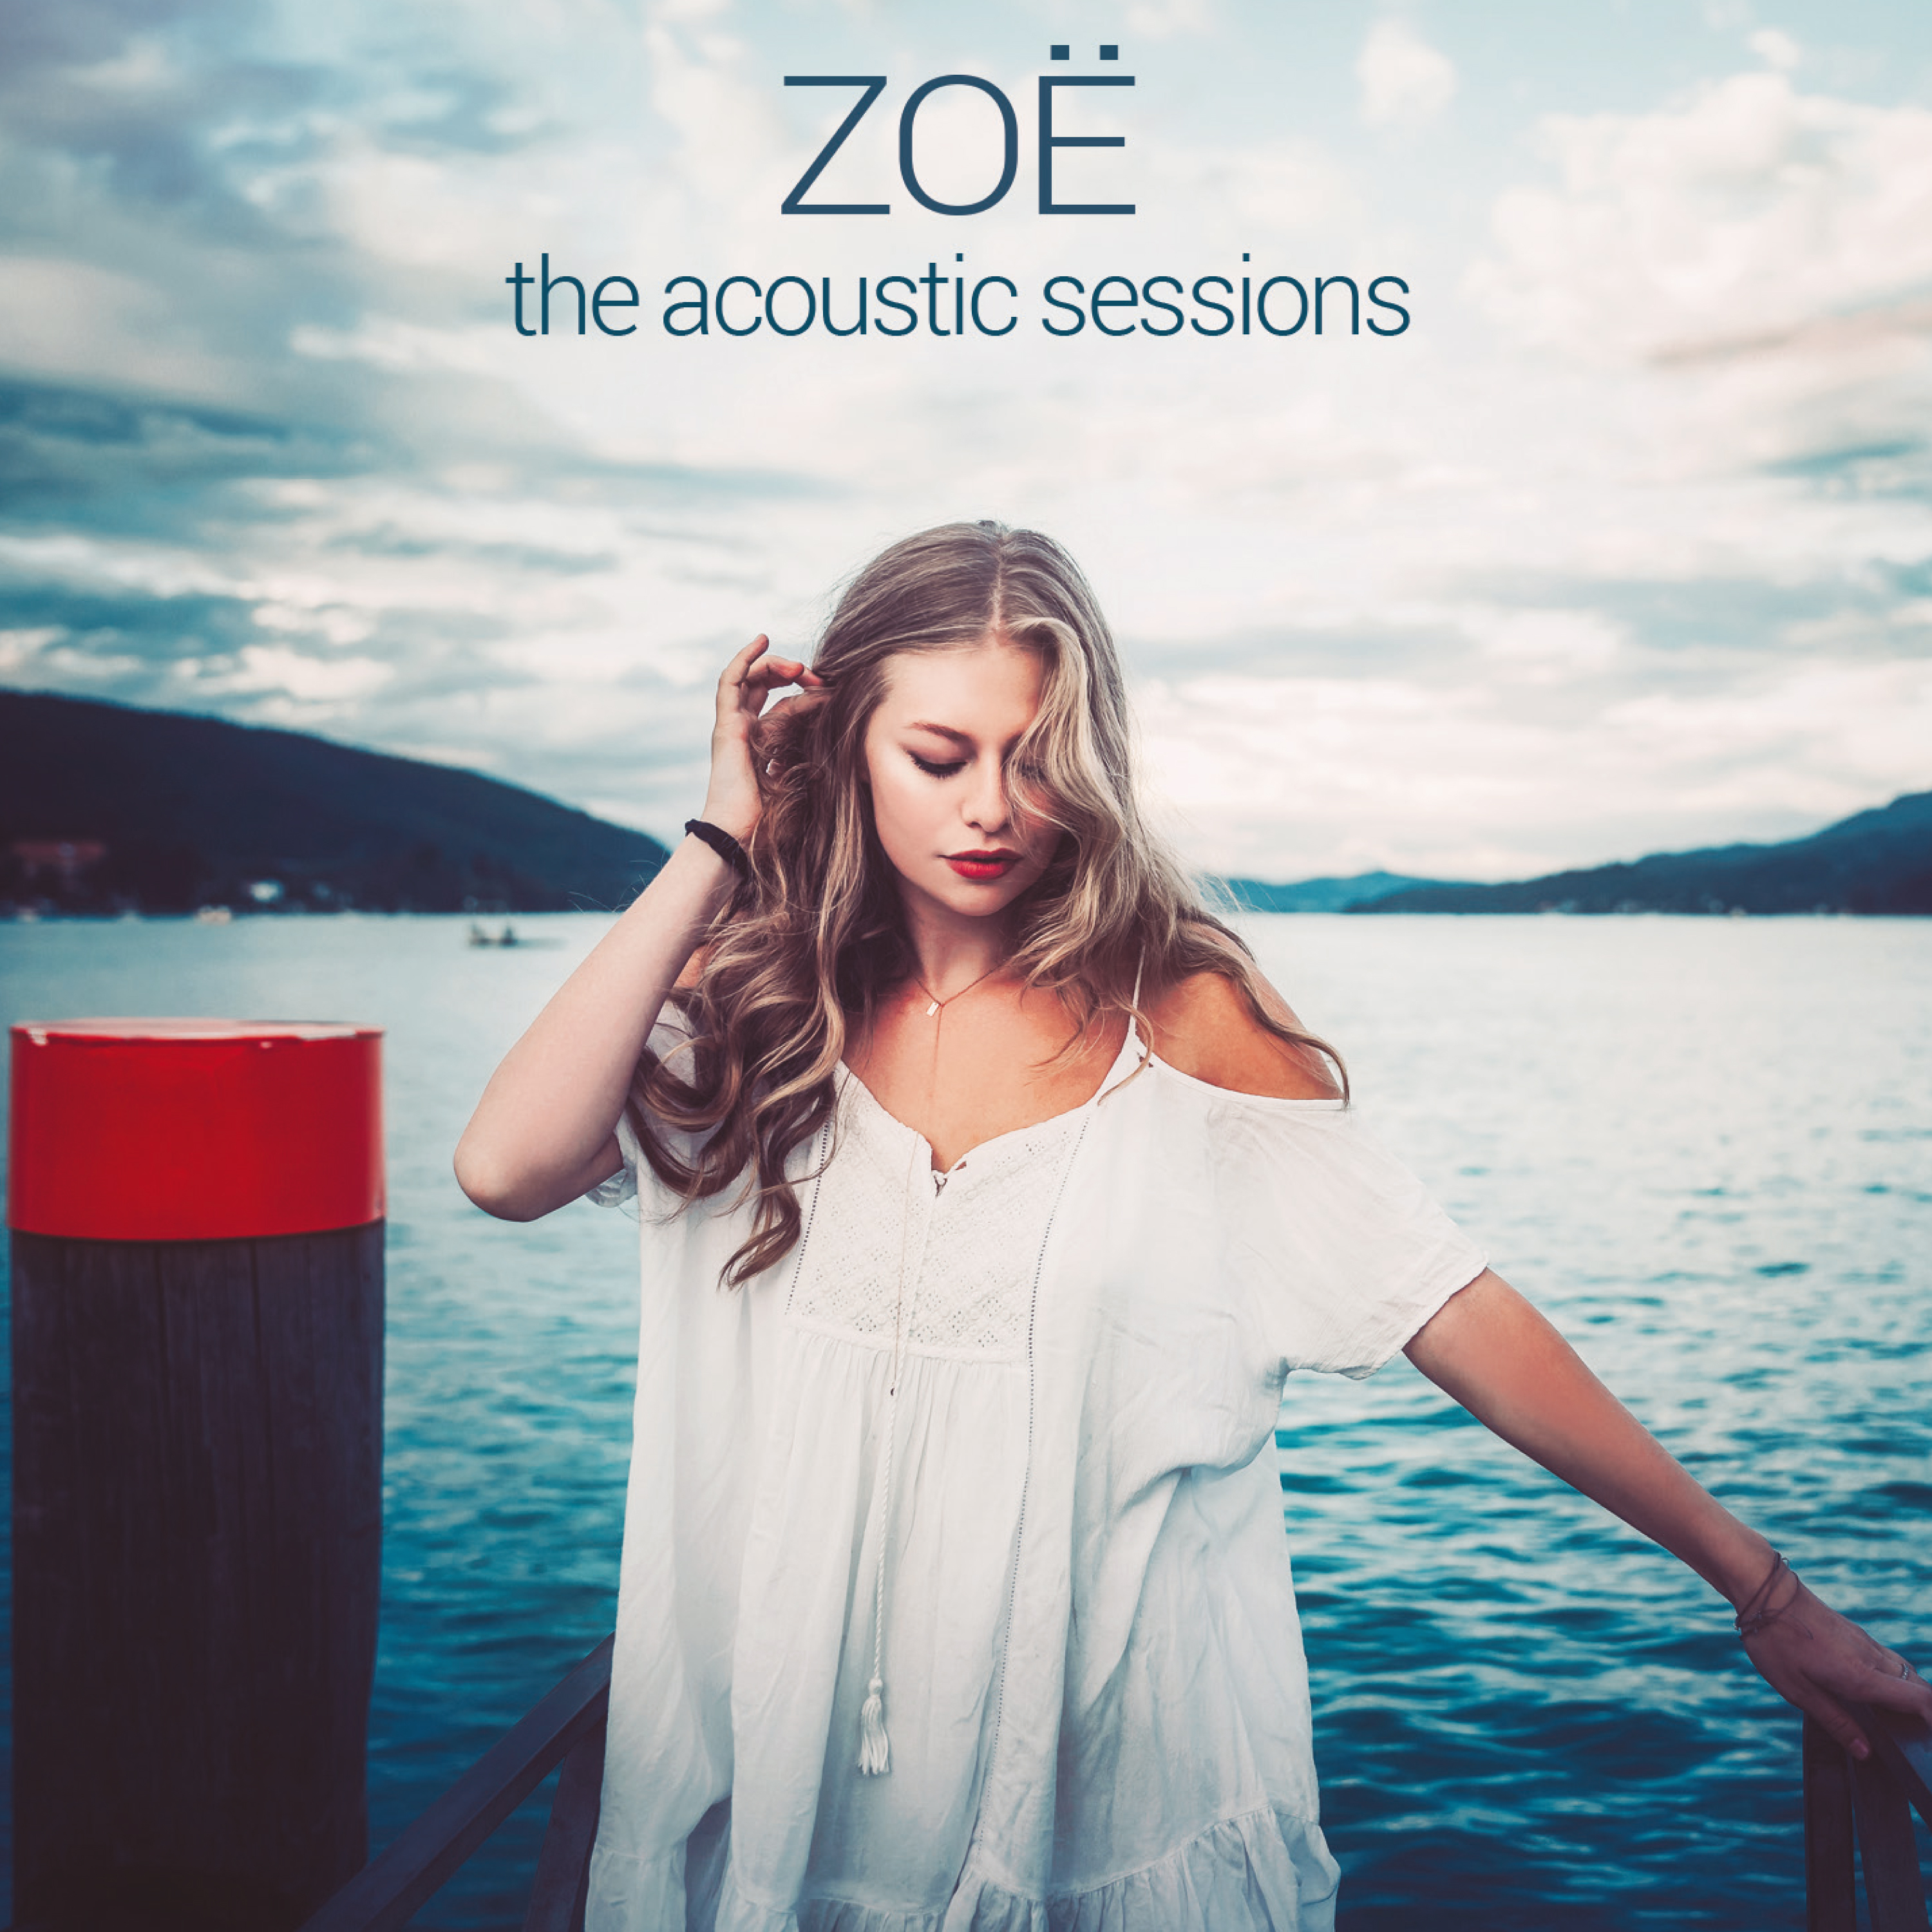 Artwork. Zoe - The Acoustic Sessions